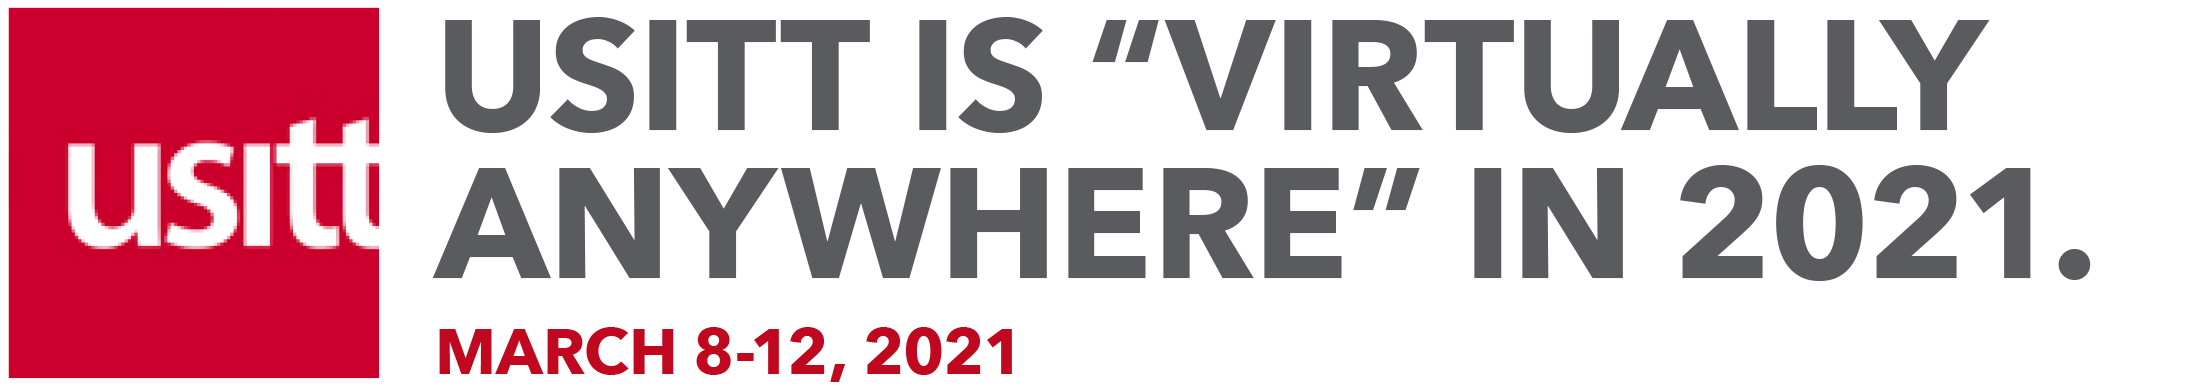 USITT IS “VIRTUALLY ANYWHERE” IN 2021. MARCH 8-12, 2021